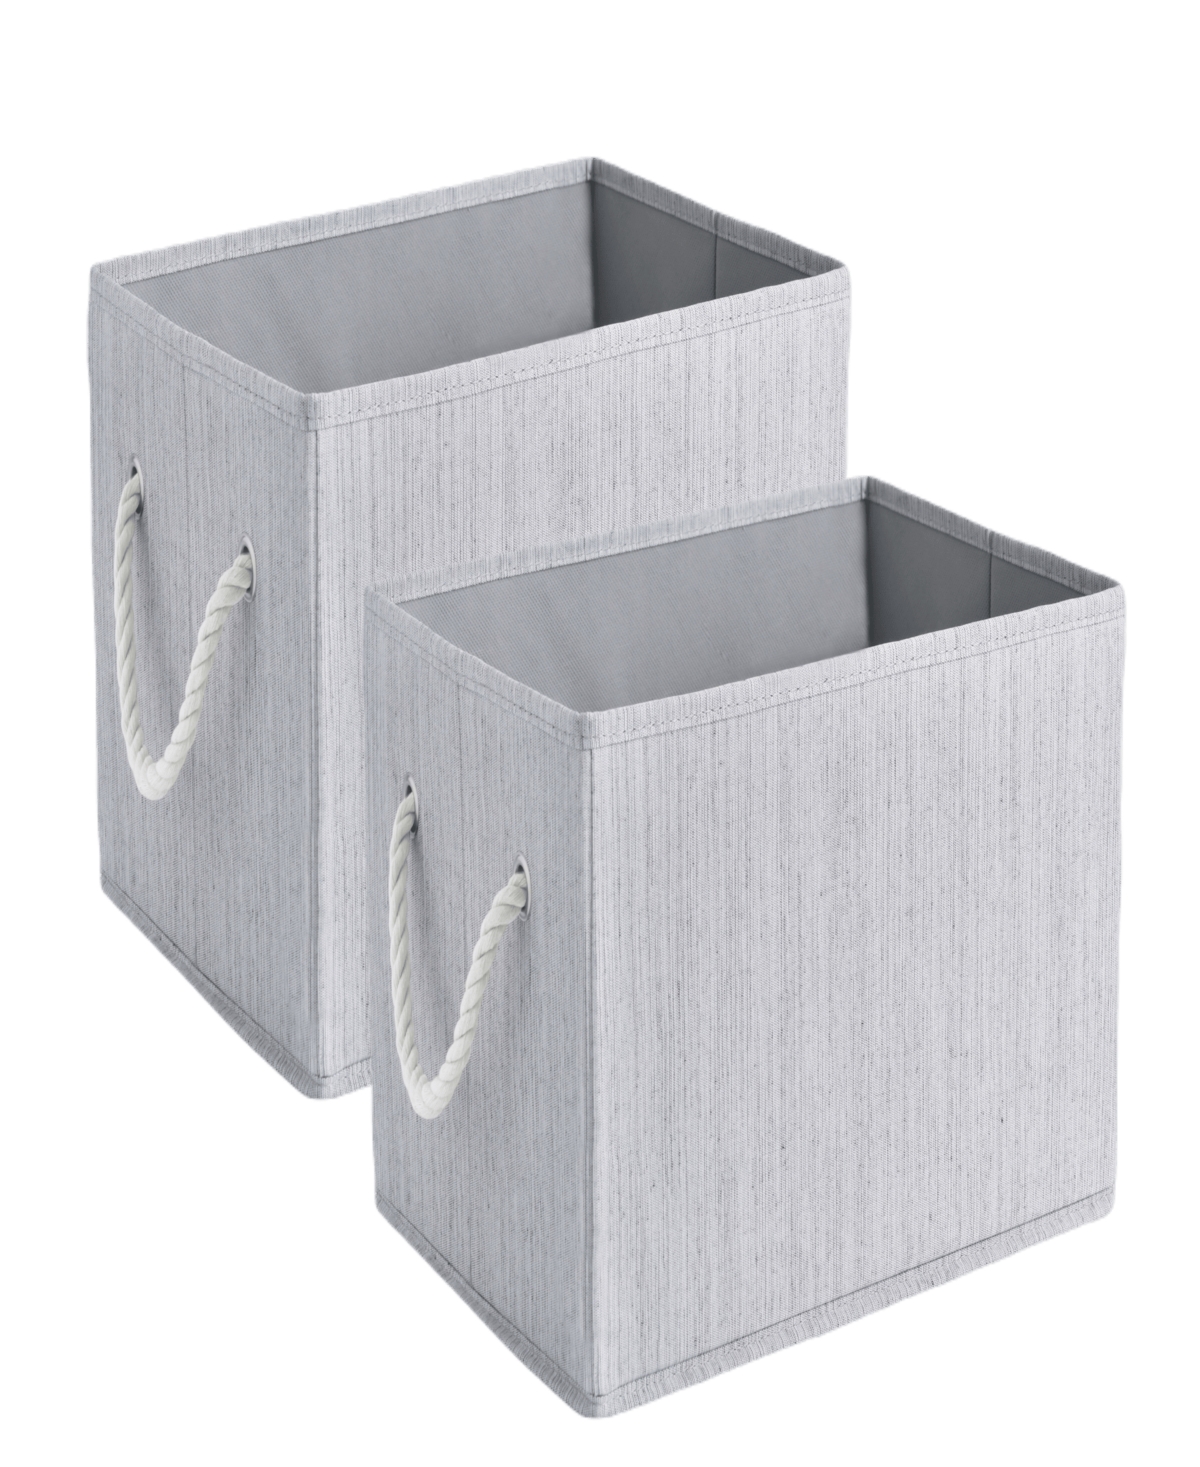 Wethinkstorage 20 Litre Collapsible Fabric Storage Bins With Cotton Rope Handles, Set Of 2 In Gray